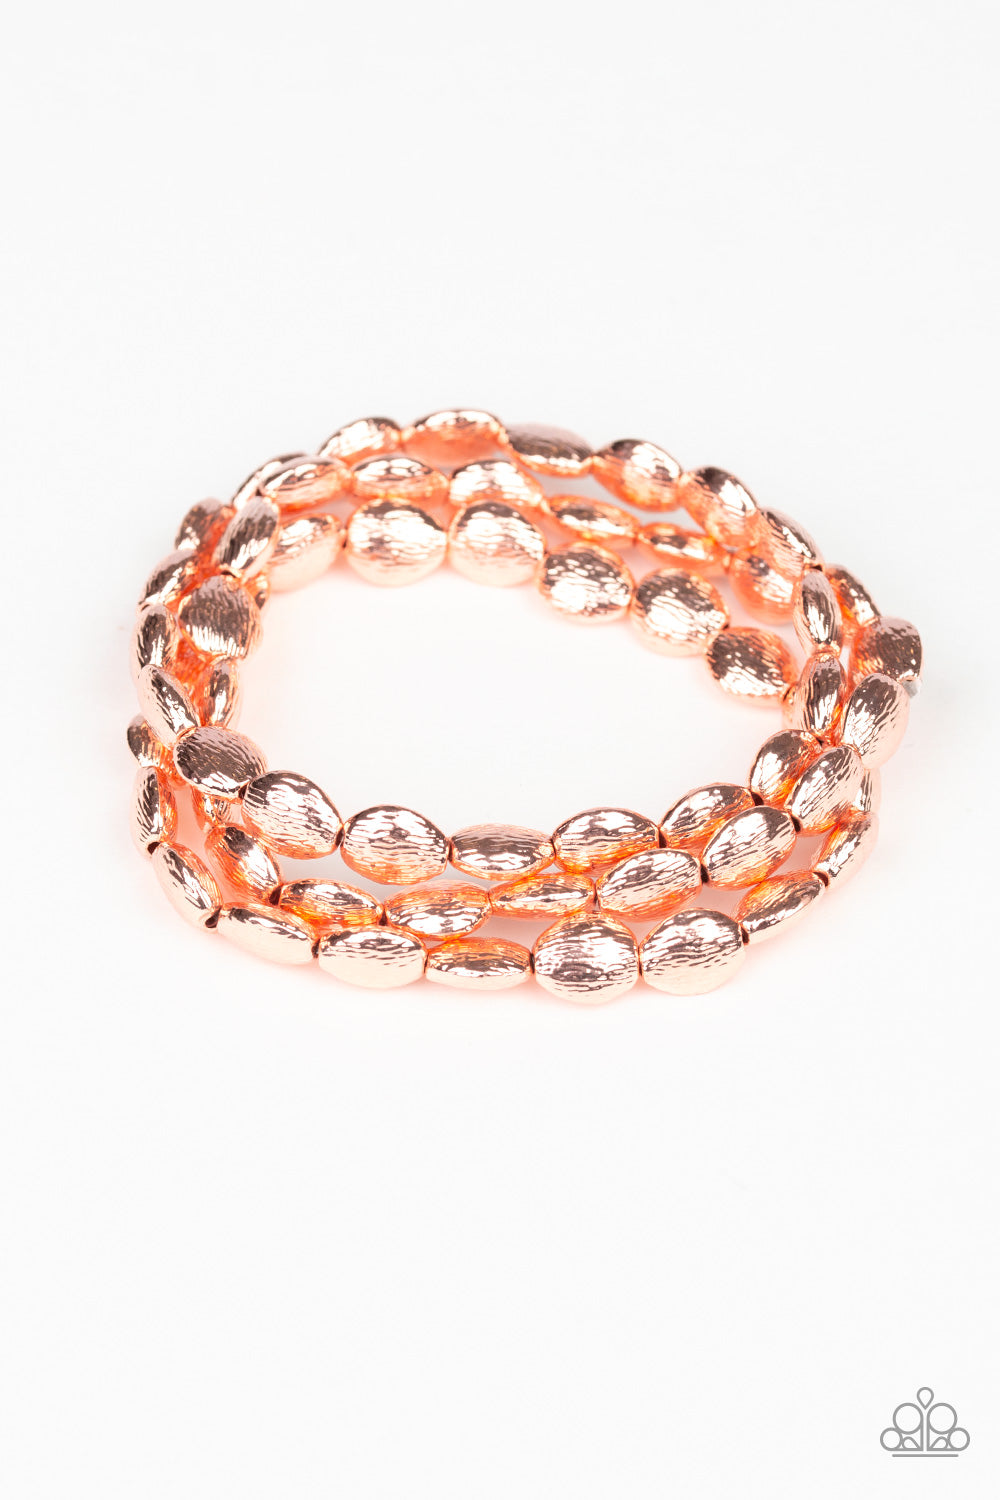 &lt;P&gt;Radiating with shimmery textures, dainty shiny copper beads are threaded along stretchy bands around the wrist for a casually layered look.&lt;/P&gt; 

&lt;P&gt; &lt;I&gt;Sold as one set of three bracelets.&lt;/I&gt;  &lt;/P&gt;

&lt;imgsrc=\&quot;https://d9b54x484lq62.cloudfront.net/paparazzi/shopping/images/517_tag150x115_1.png\&quot; alt=\&quot;New Kit\&quot; align=\&quot;middle\&quot; height=\&quot;50\&quot; width=\&quot;50\&quot;/&gt;